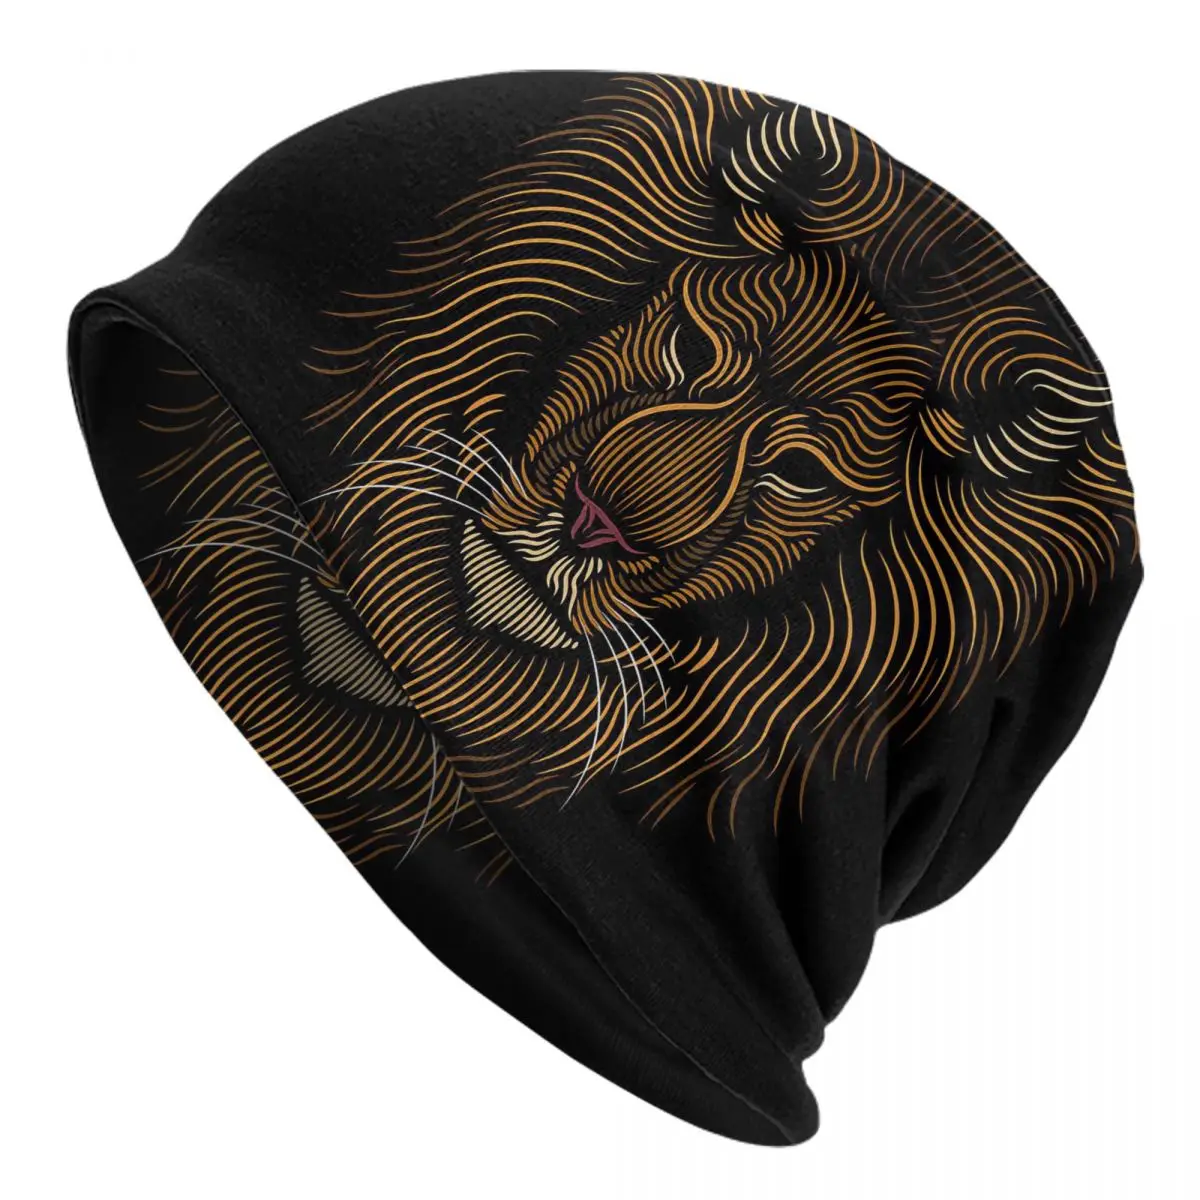 Lion Head Line Art Grapic Animal Drawing Adult Men's Women's Knit Hat Keep warm winter knitted hat